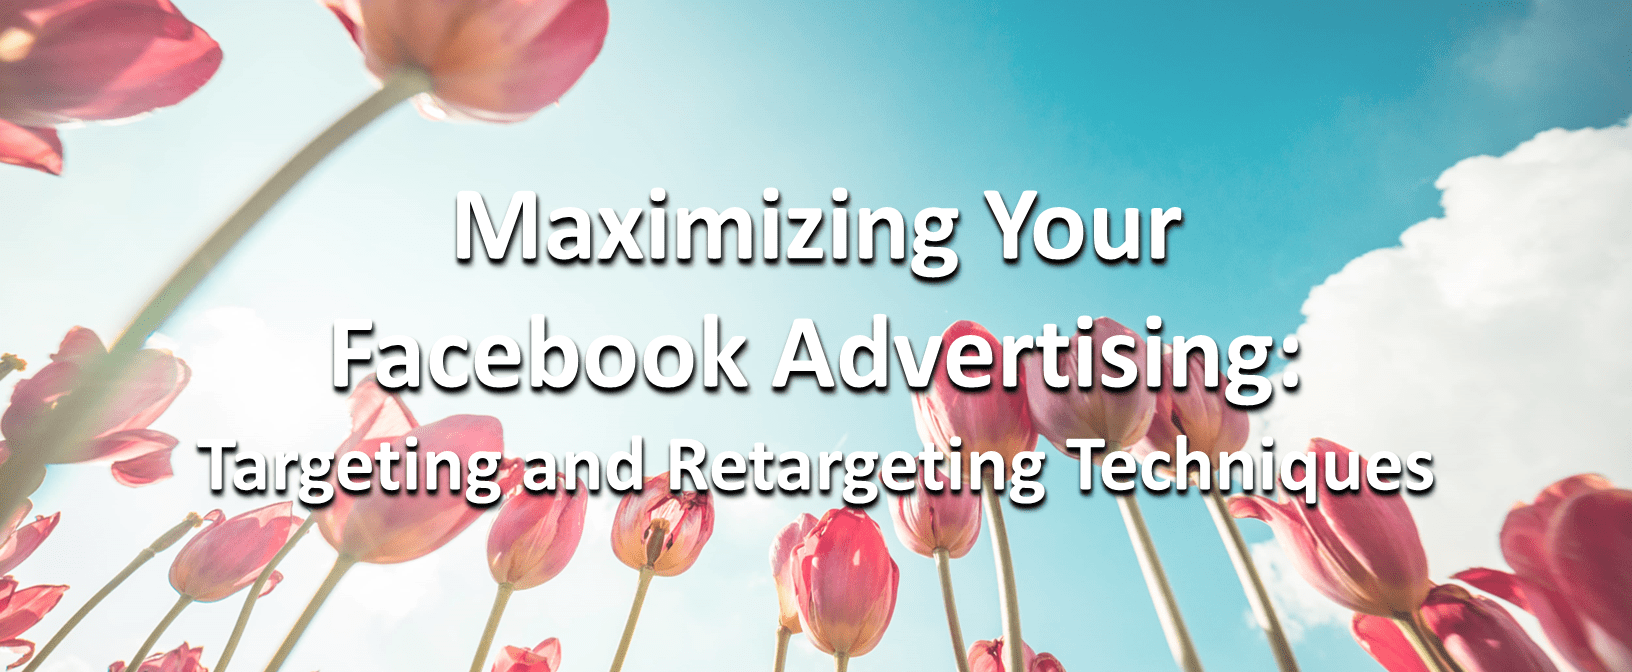 Maximizing Your Facebook Advertising: Targeting and Retargeting Techniques